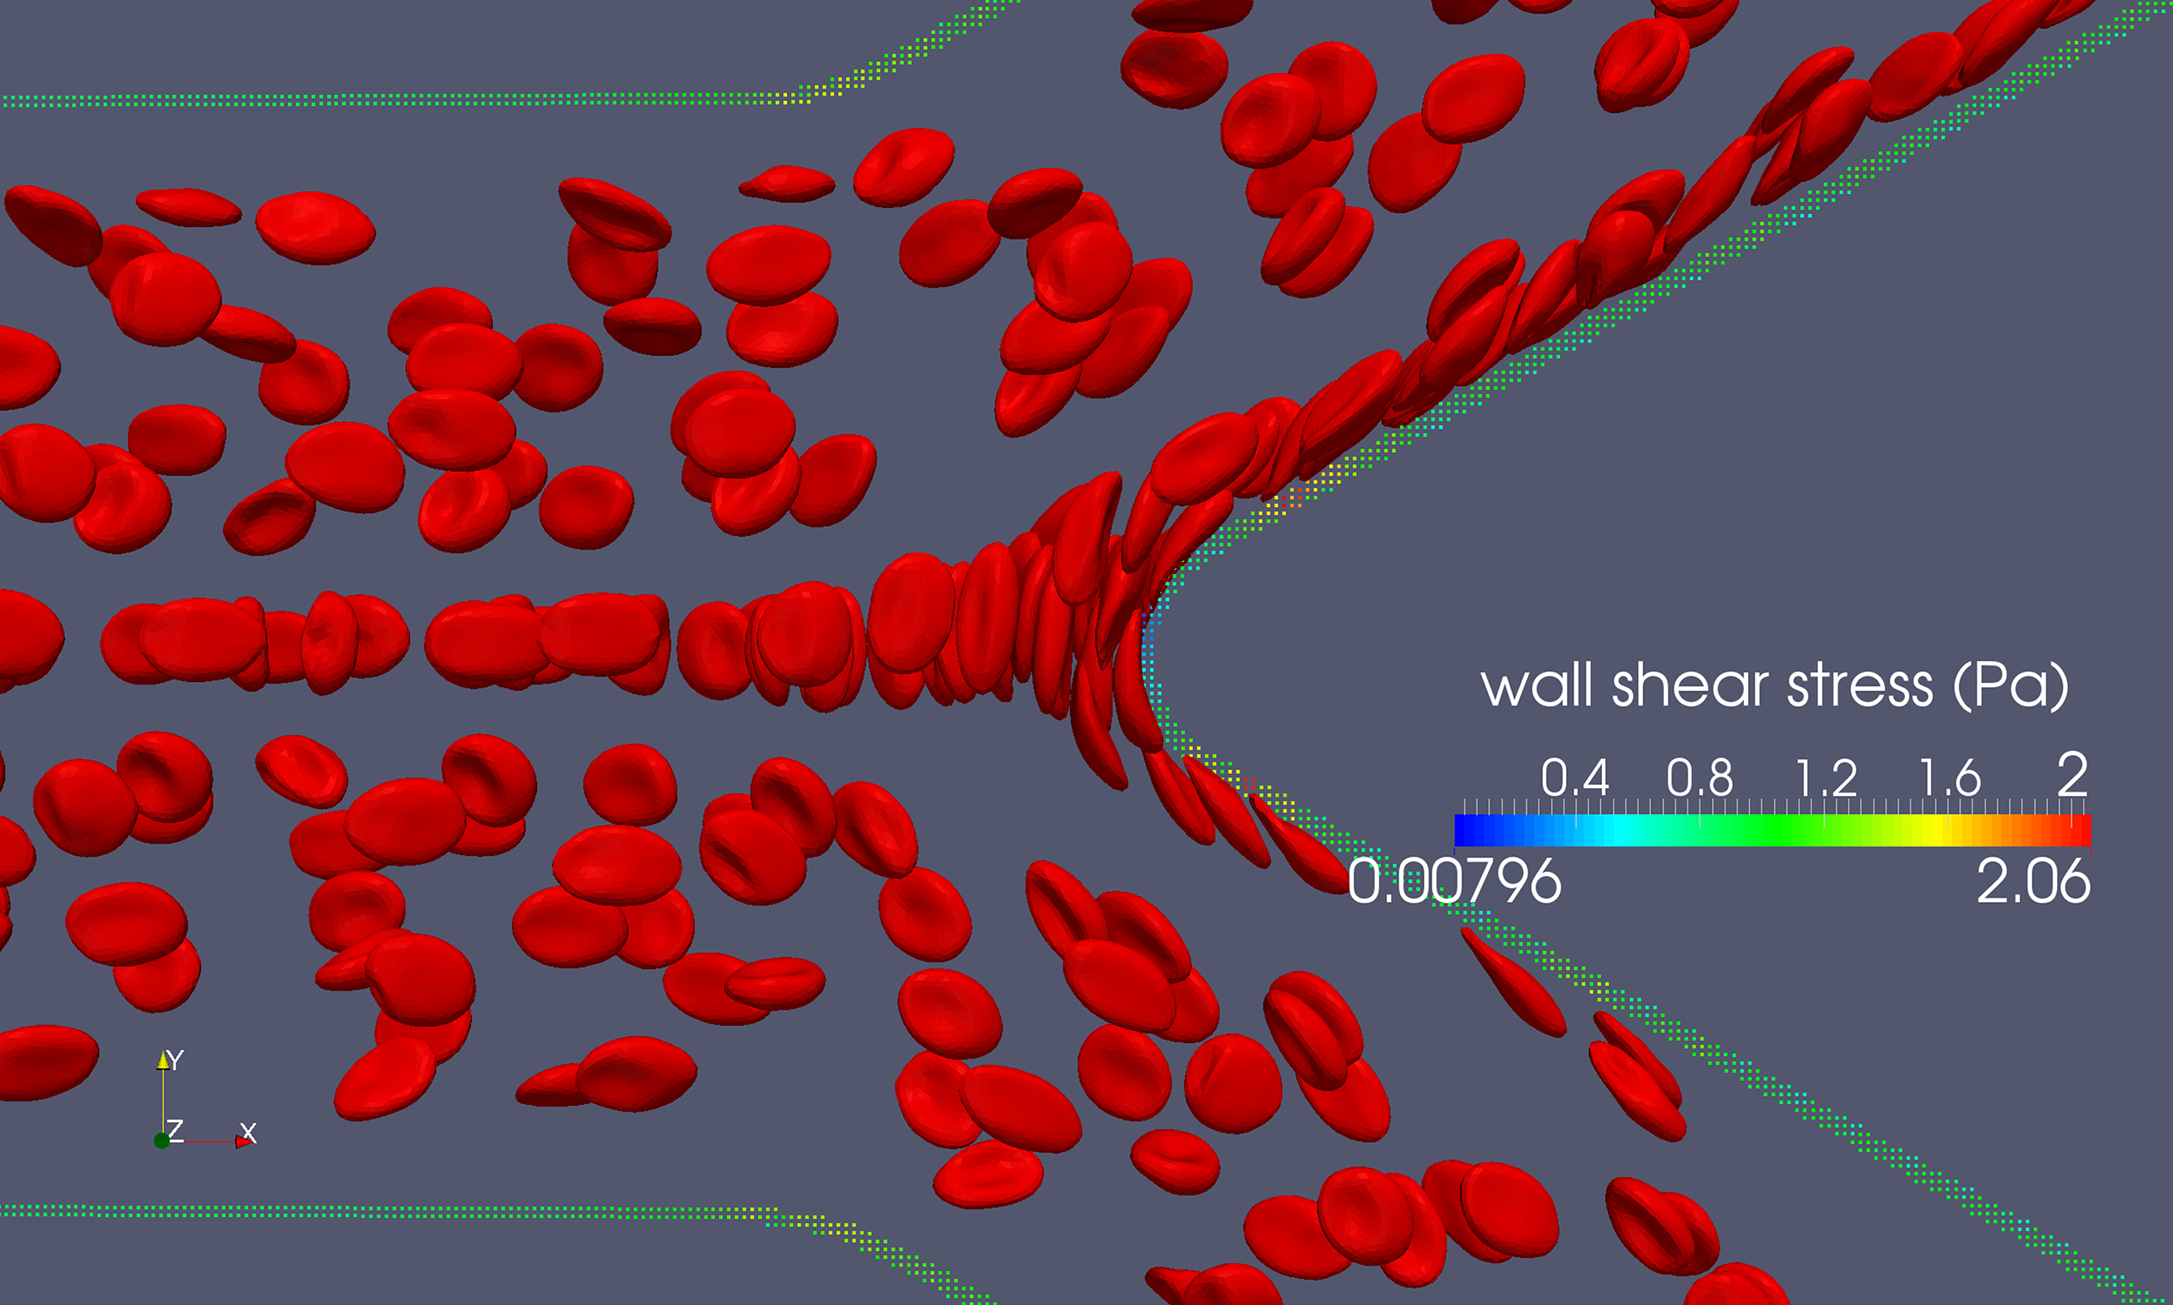 This image from a 3D immersed-boundary lattice-Boltzmann simulation vividly depicts a suspension of deformable red blood cells travelling through a bifurcating blood vessel. The RBCs are immersed in a Newtonian plasma. The main branch of the blood vessel is 96-micrometer wide, and the child branches are 50-micrometer wide.